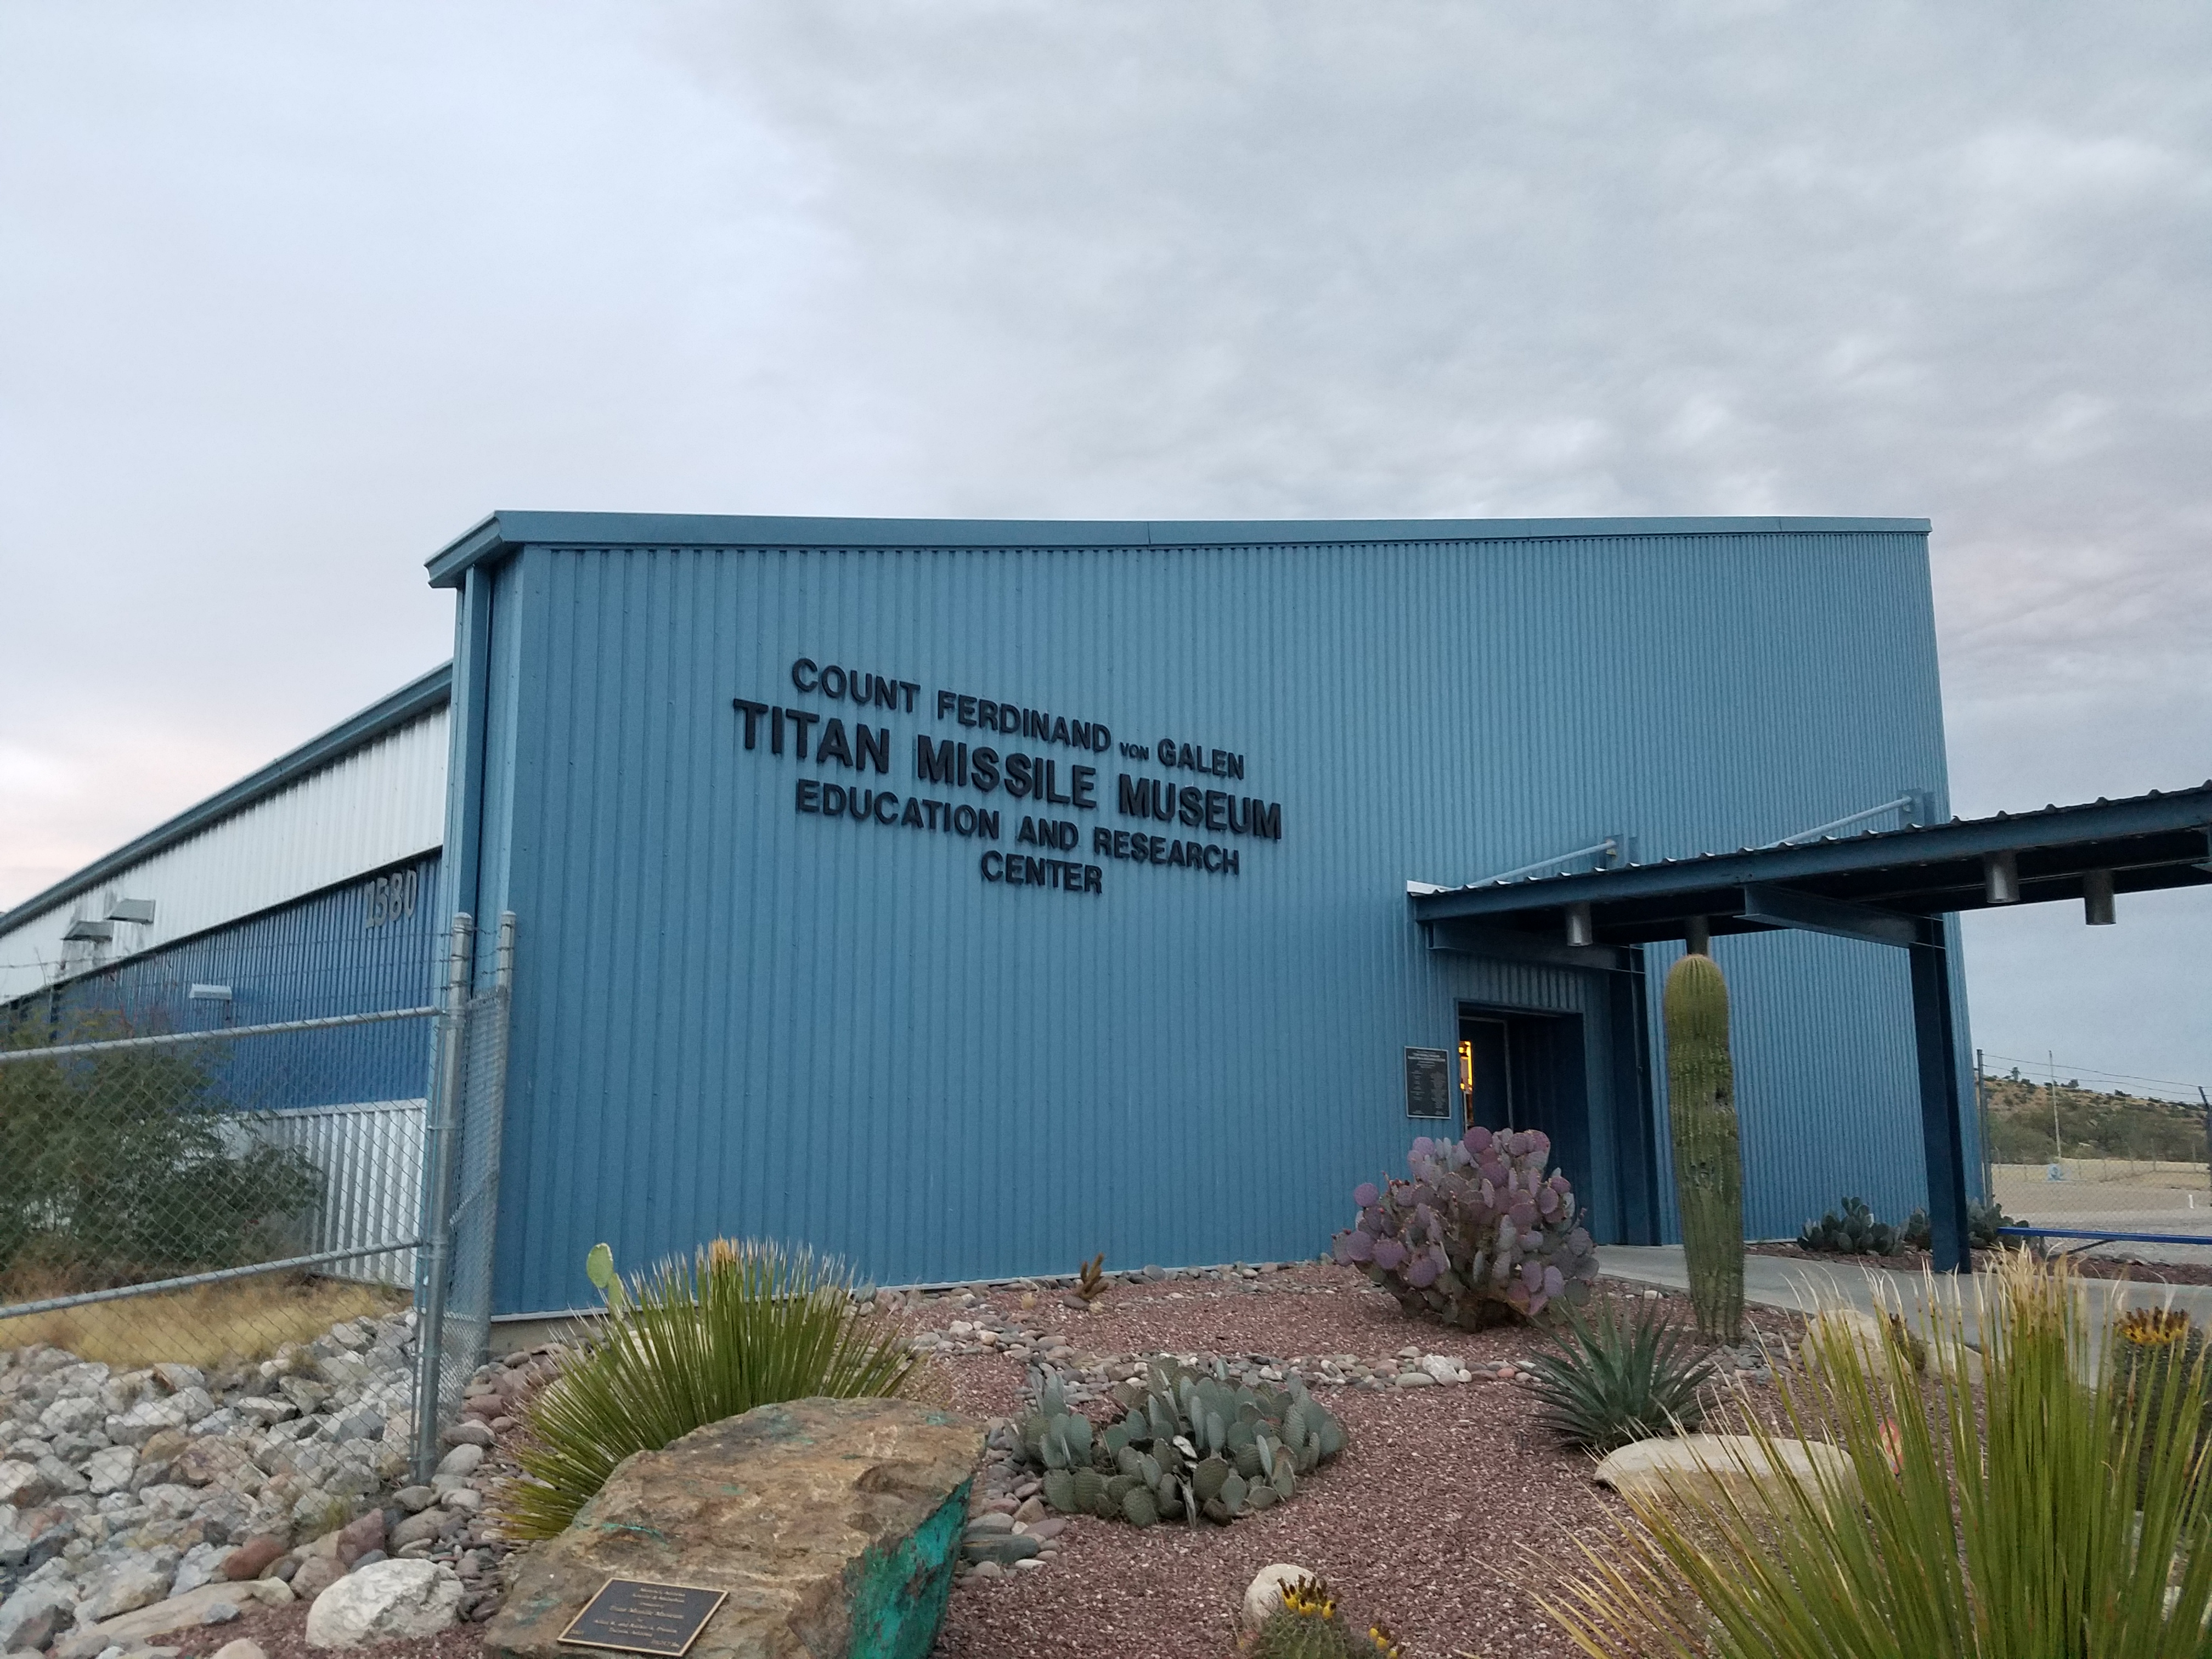 What are some interesting items at the Titan Missile Museum in Arizona?